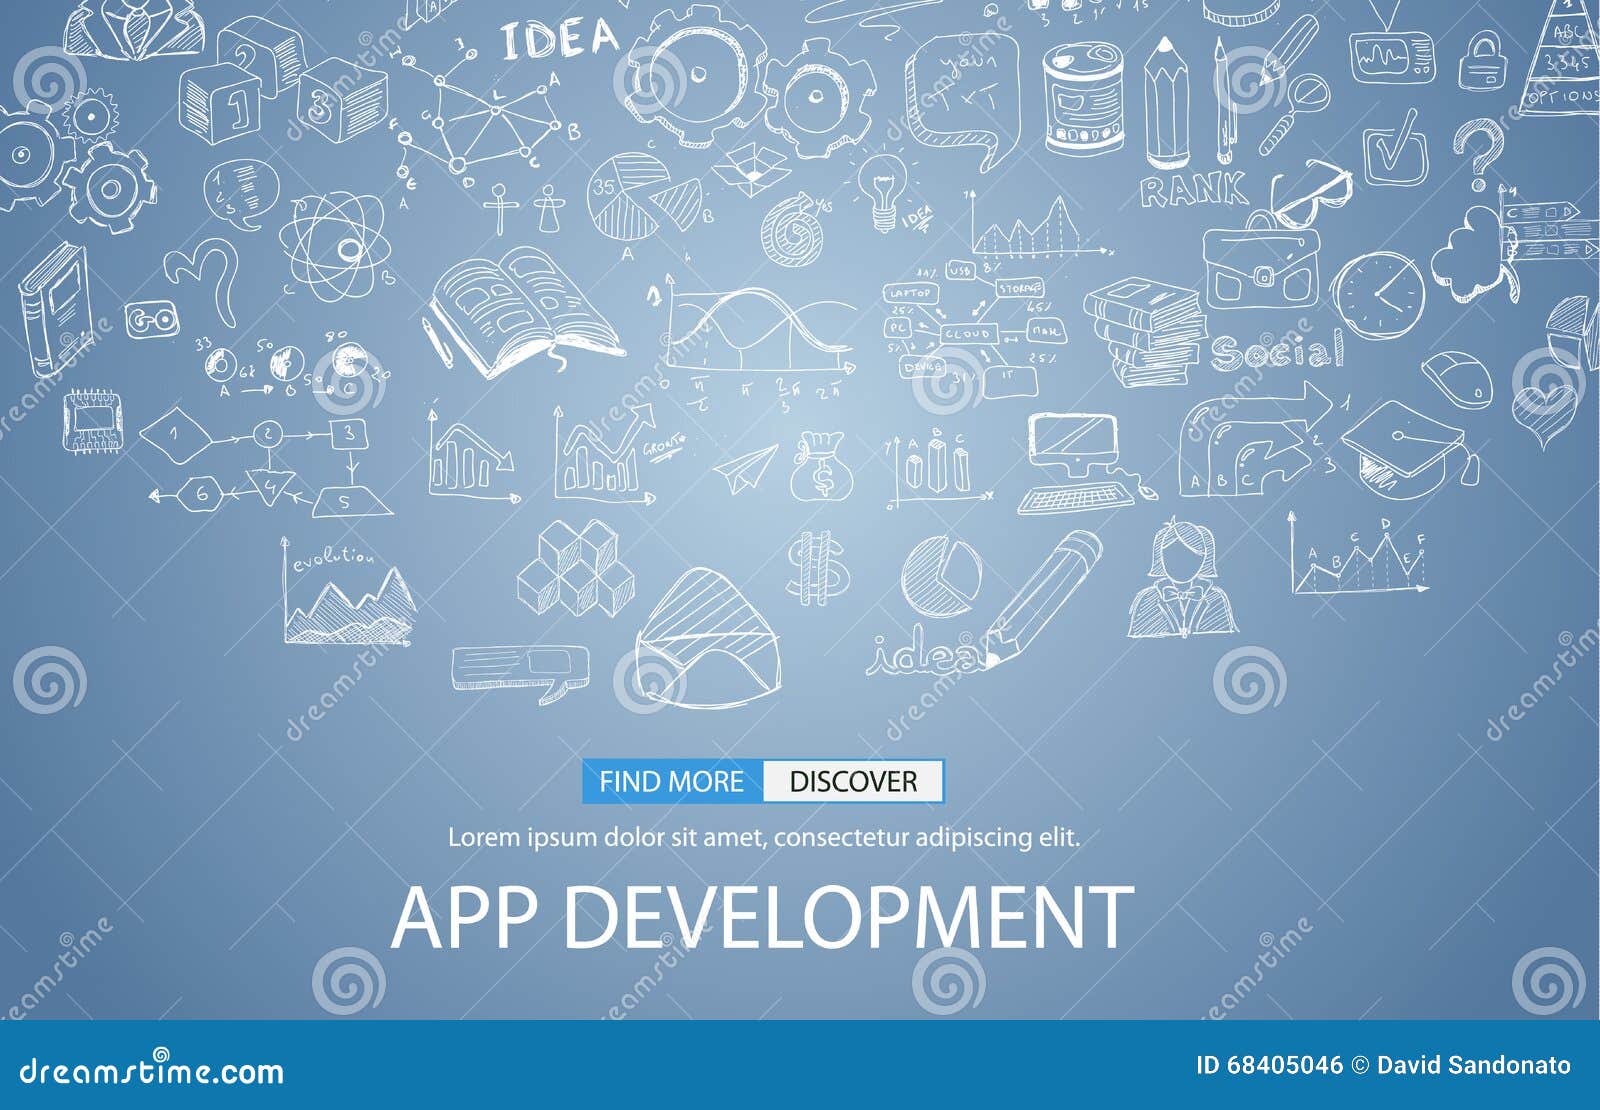 App Development Concept Background With Doodle Design Style User